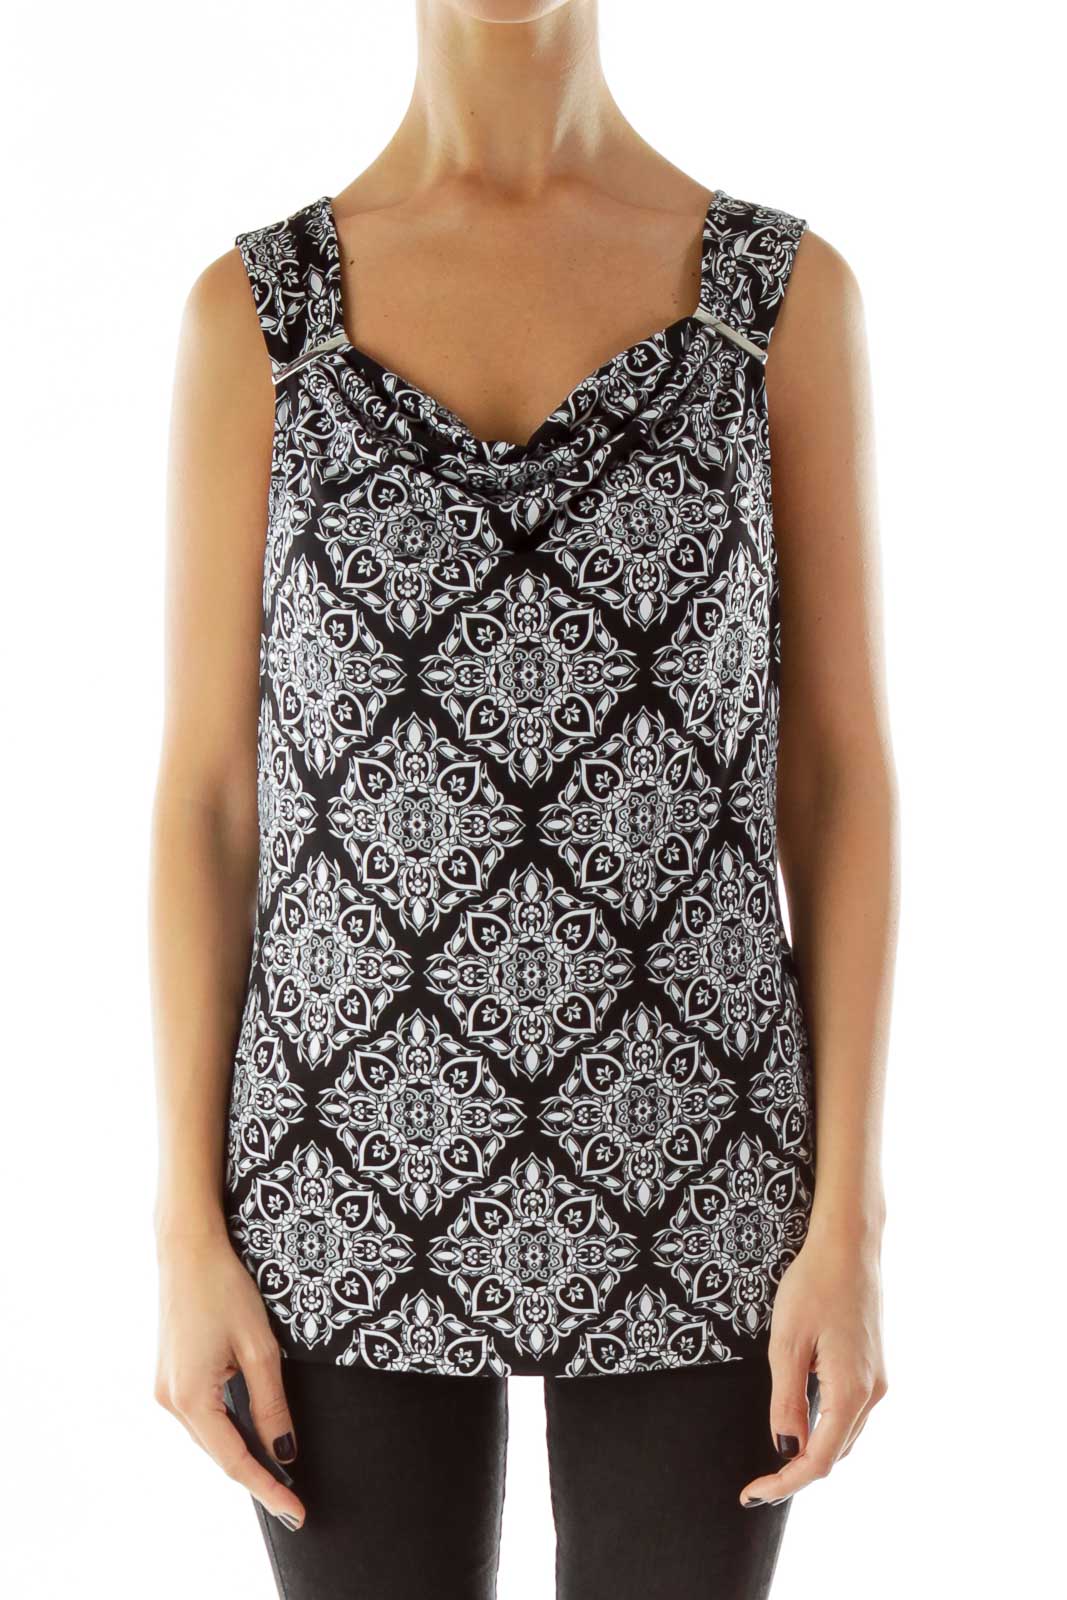 Black and White Floral Tank Top by White House Black Market Womens